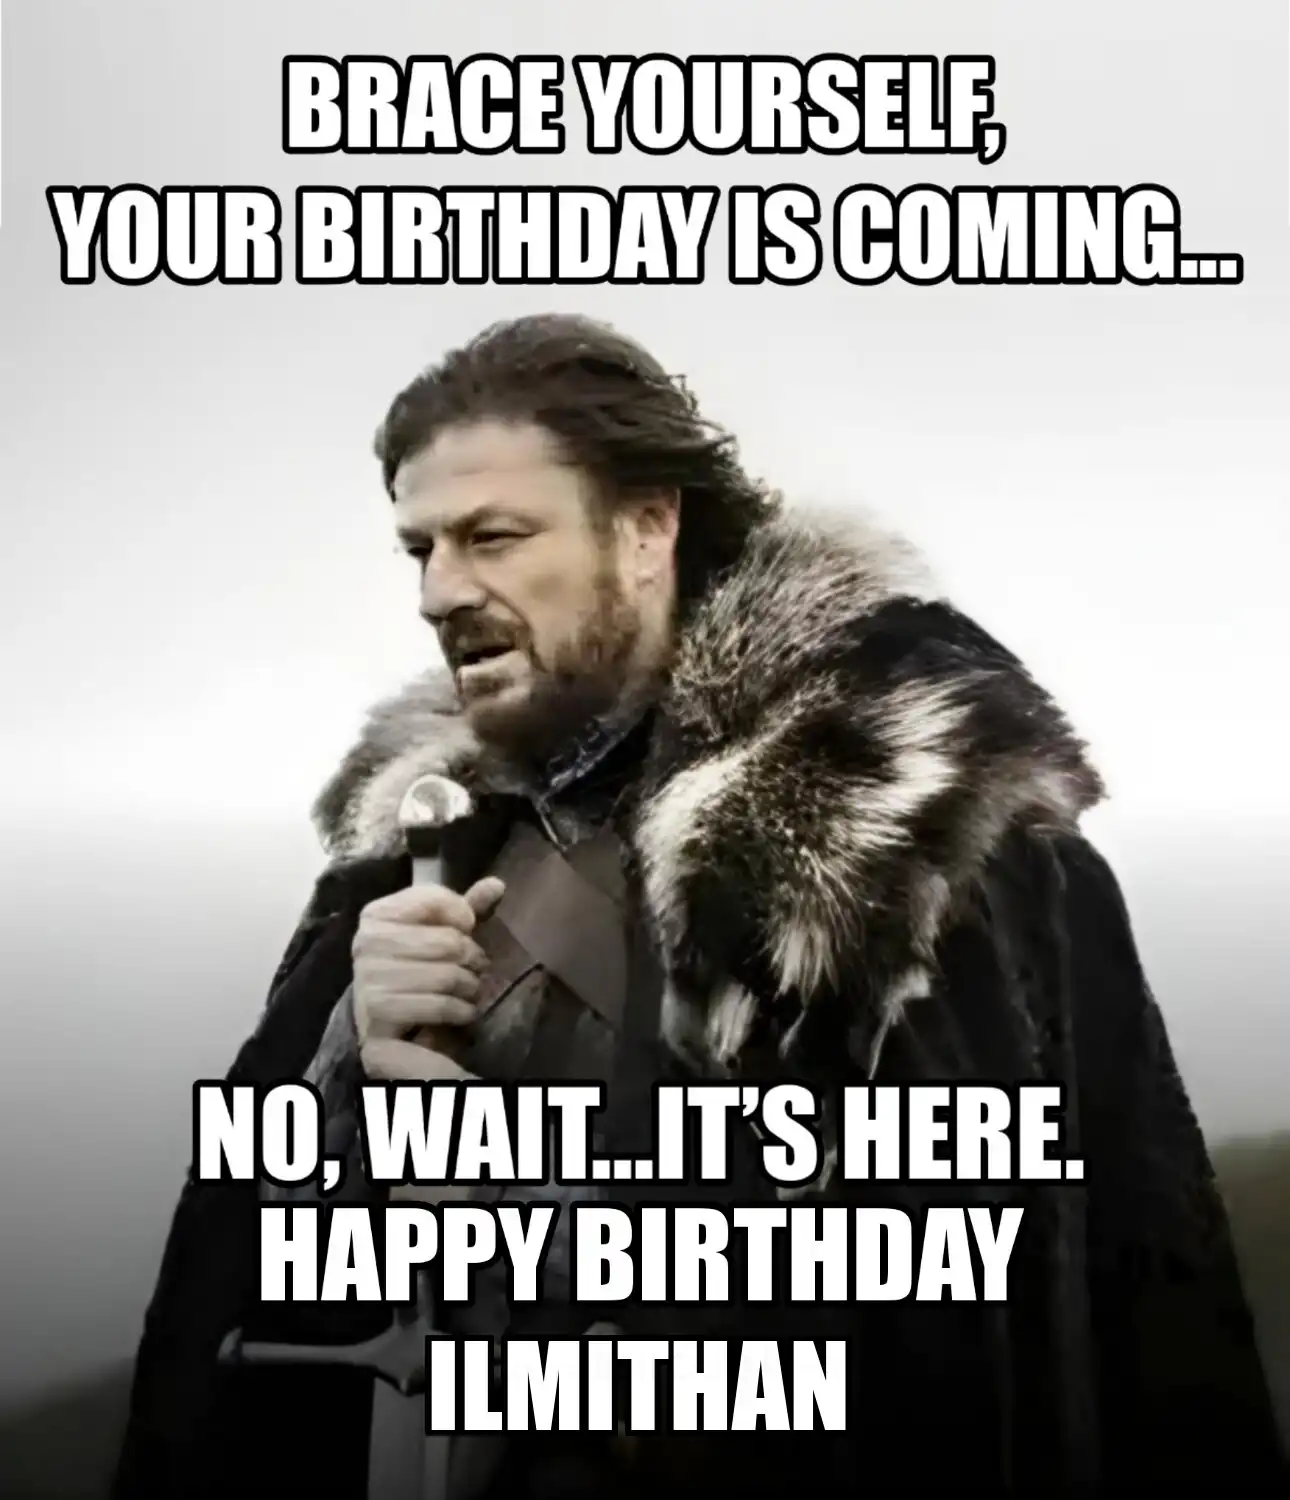 Happy Birthday Ilmithan Brace Yourself Your Birthday Is Coming Meme